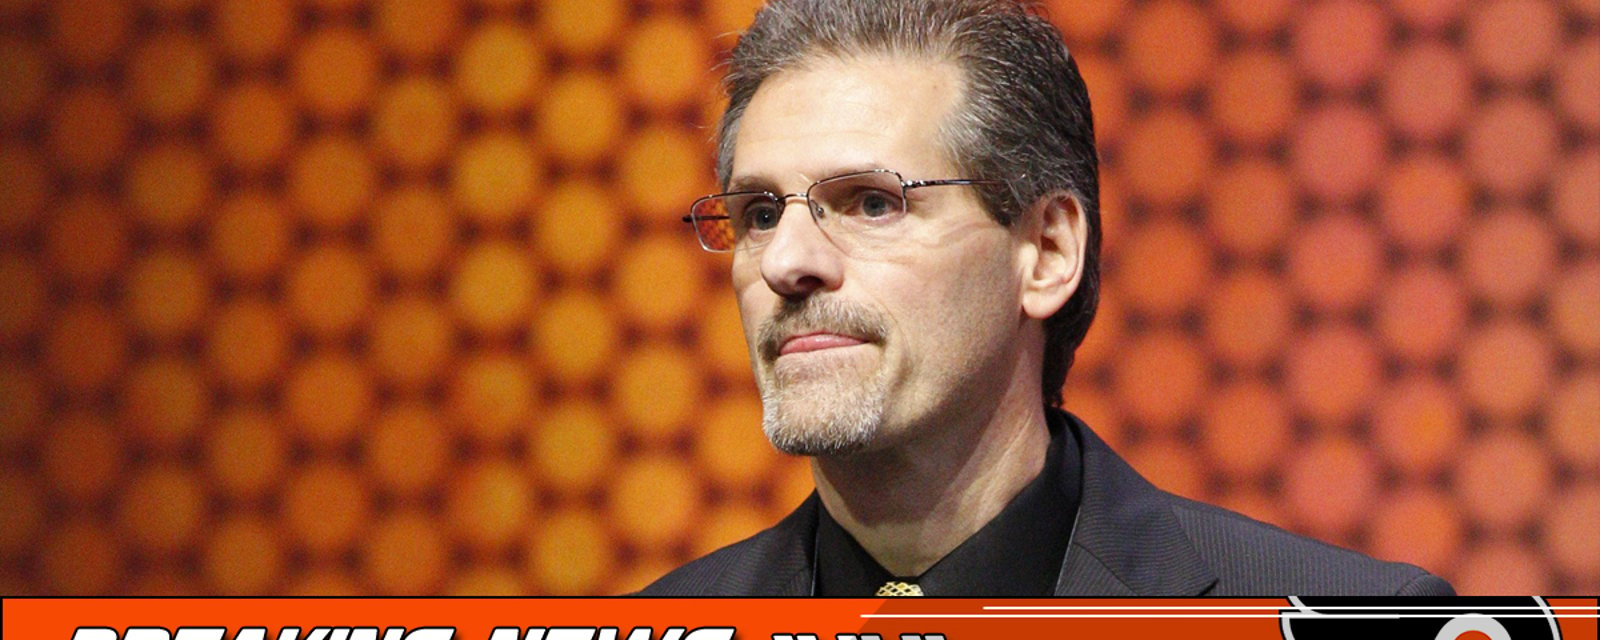 BREAKING: Flyers dismiss one of their coaching staff.